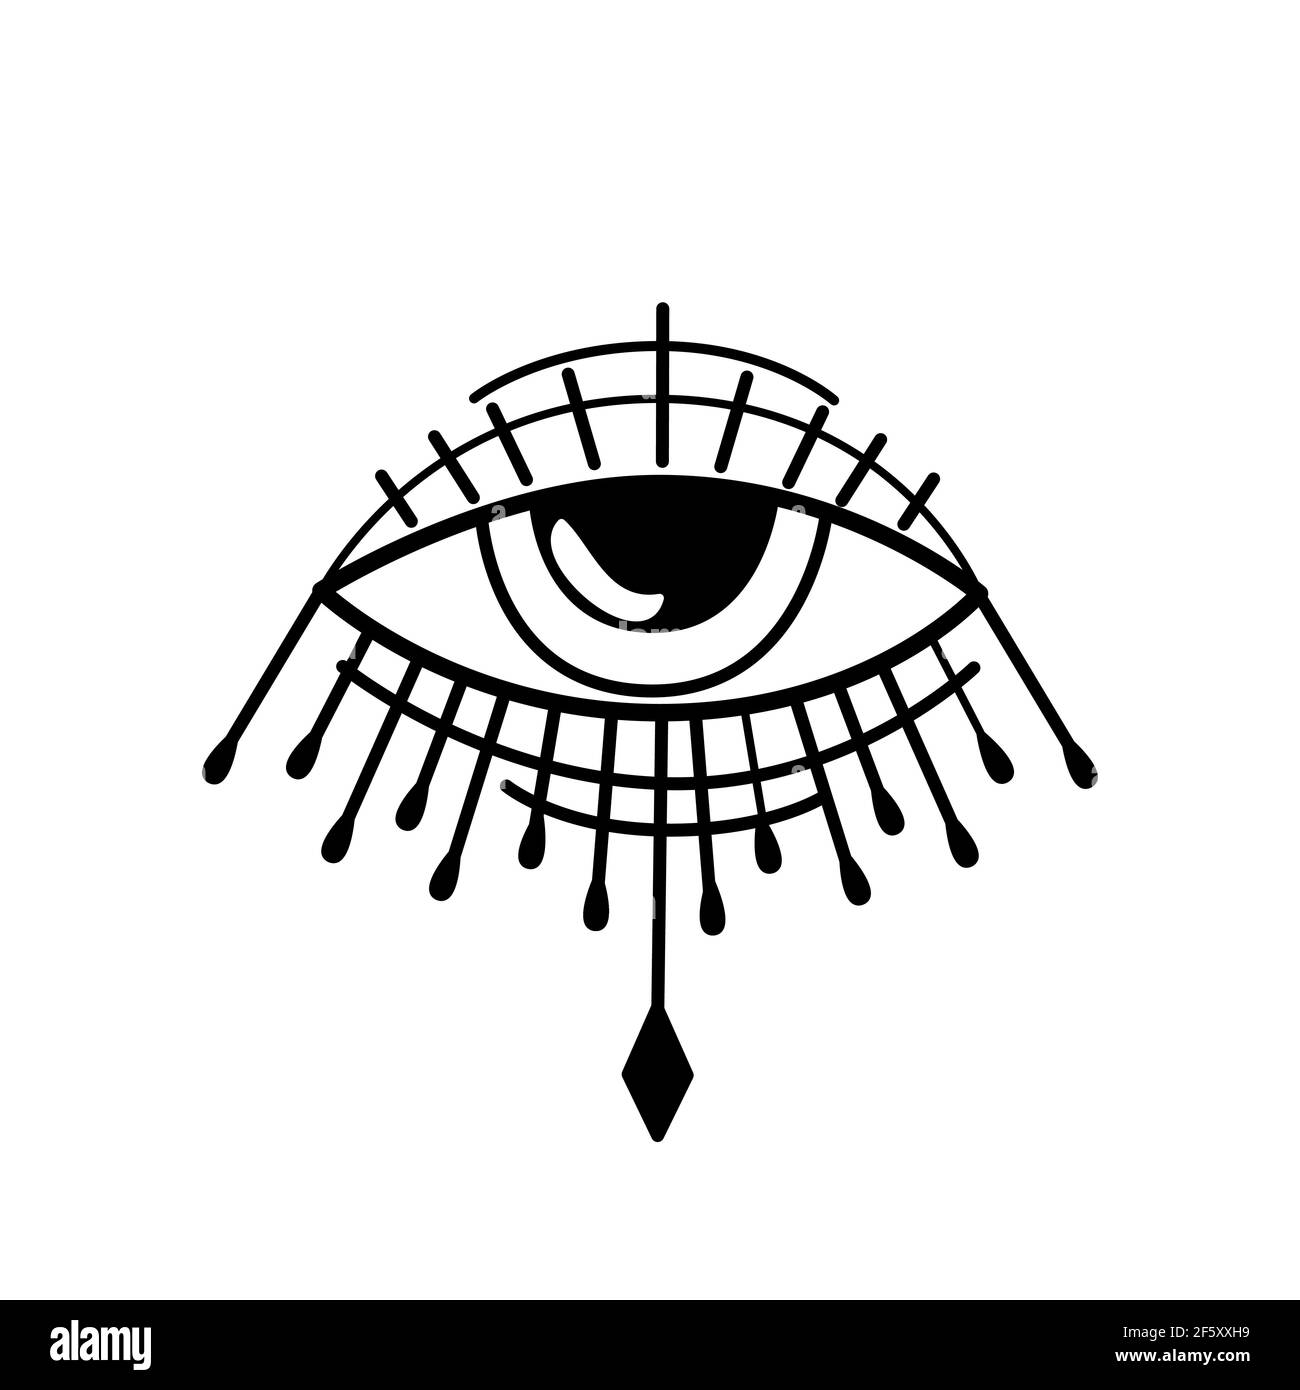 Evil eye. Eye of Providence. Magic graphic witchcraft symbol. Magical esoteric religion sacred geometry symbol vector illustration. Black icon Stock Vector